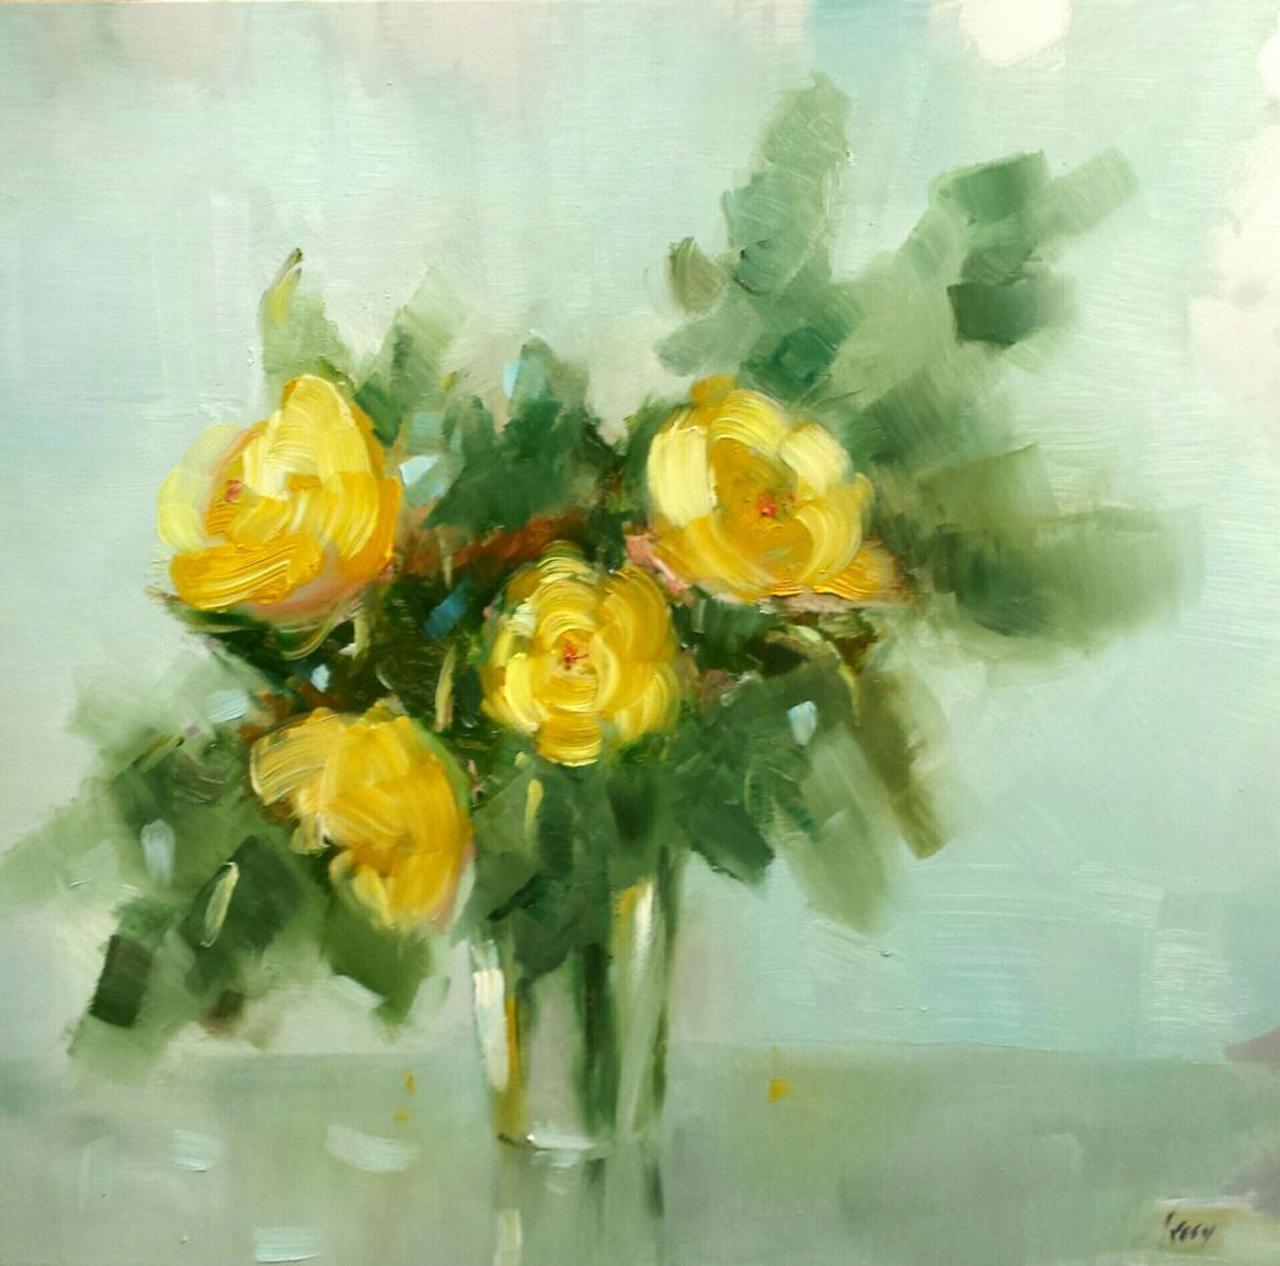 #oil on aluminium. 'Yellow Peonies in a glass' #stillLife #florals #painting #art http://t.co/XnyYrGkEv7